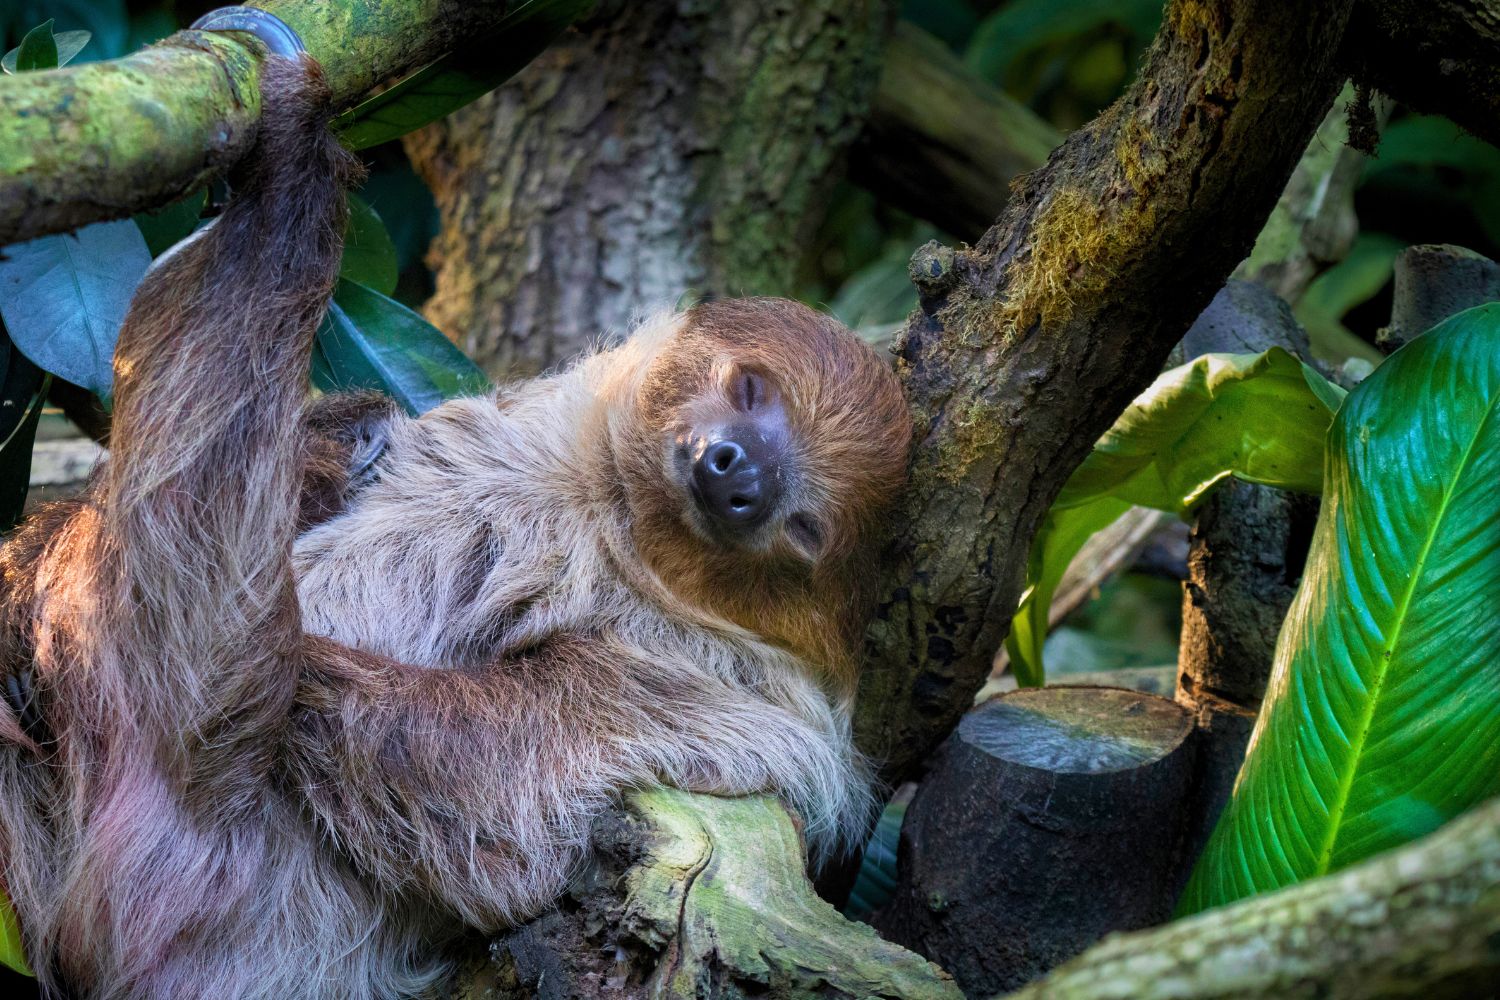 2. Sloths are great at hanging out (even after they die!)